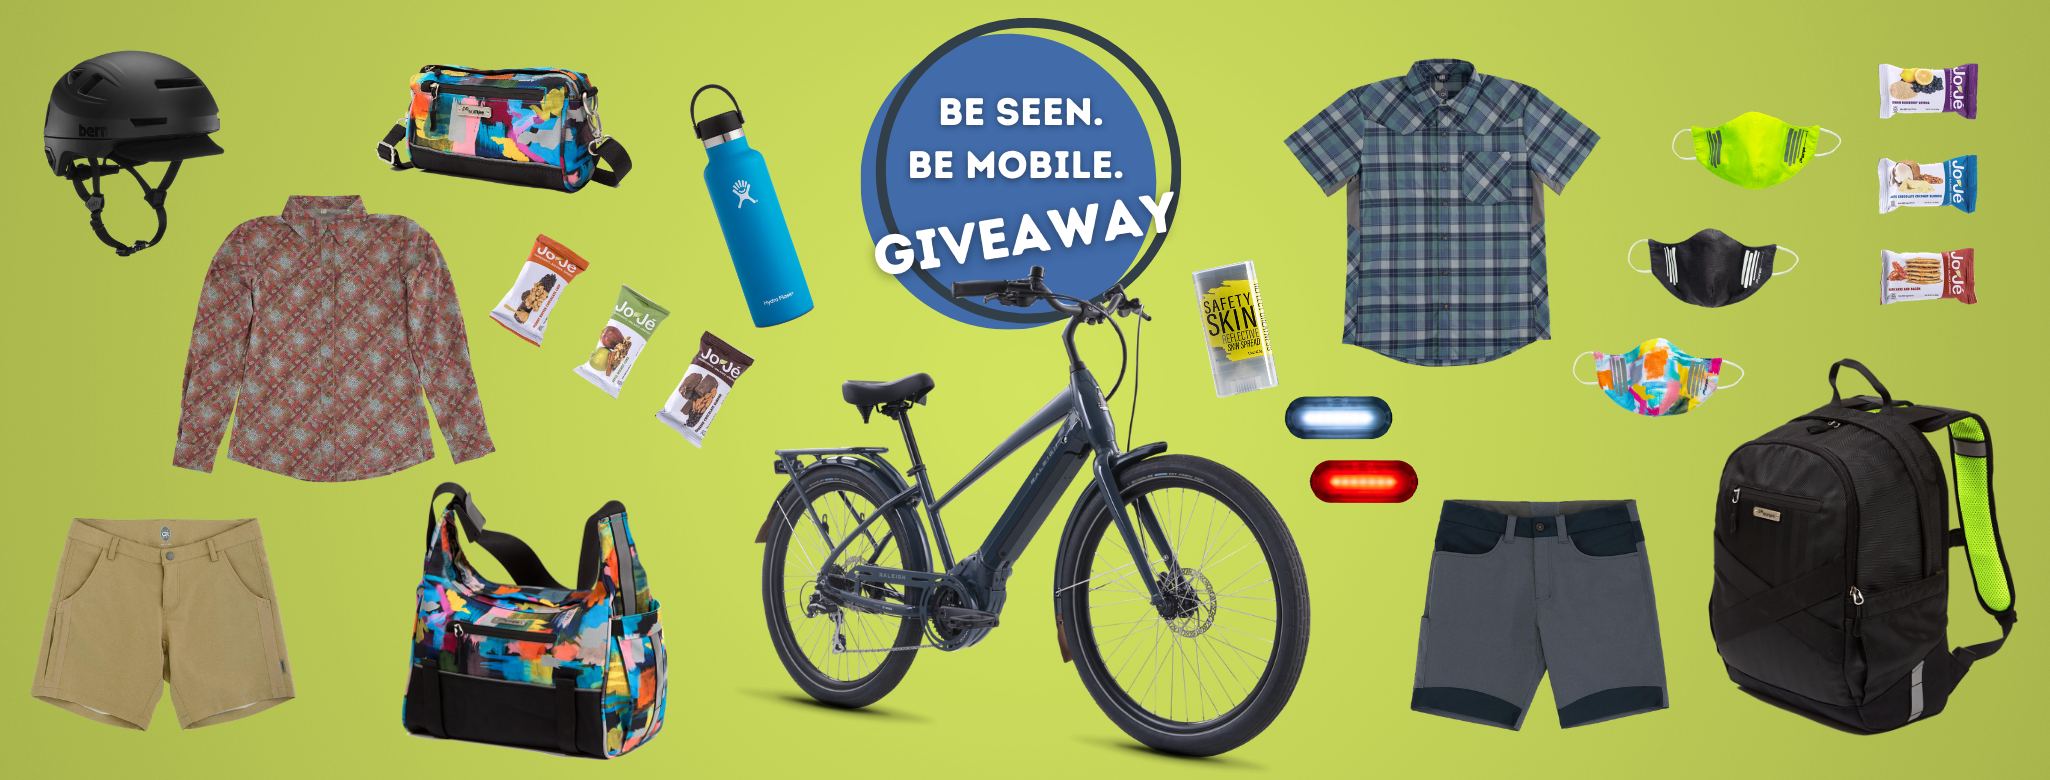 Be Seen. Be Mobile. Giveaway